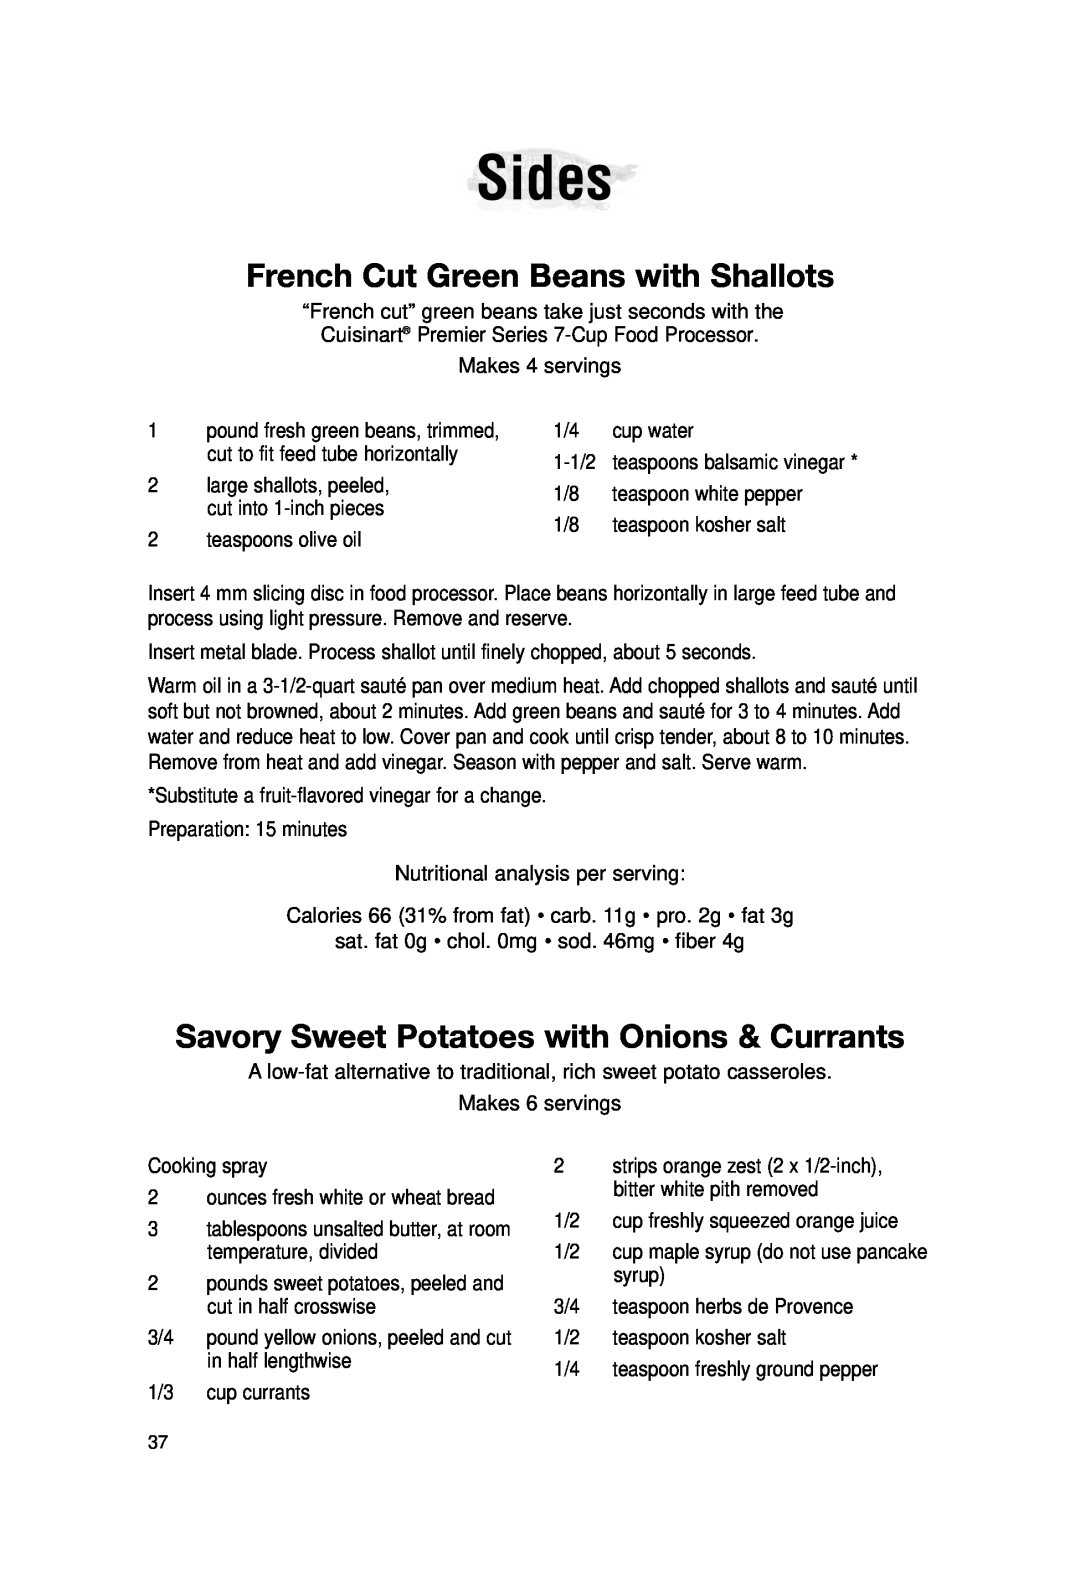 Cuisinart DLC-2007N manual Sides, French Cut Green Beans with Shallots, Savory Sweet Potatoes with Onions & Currants 